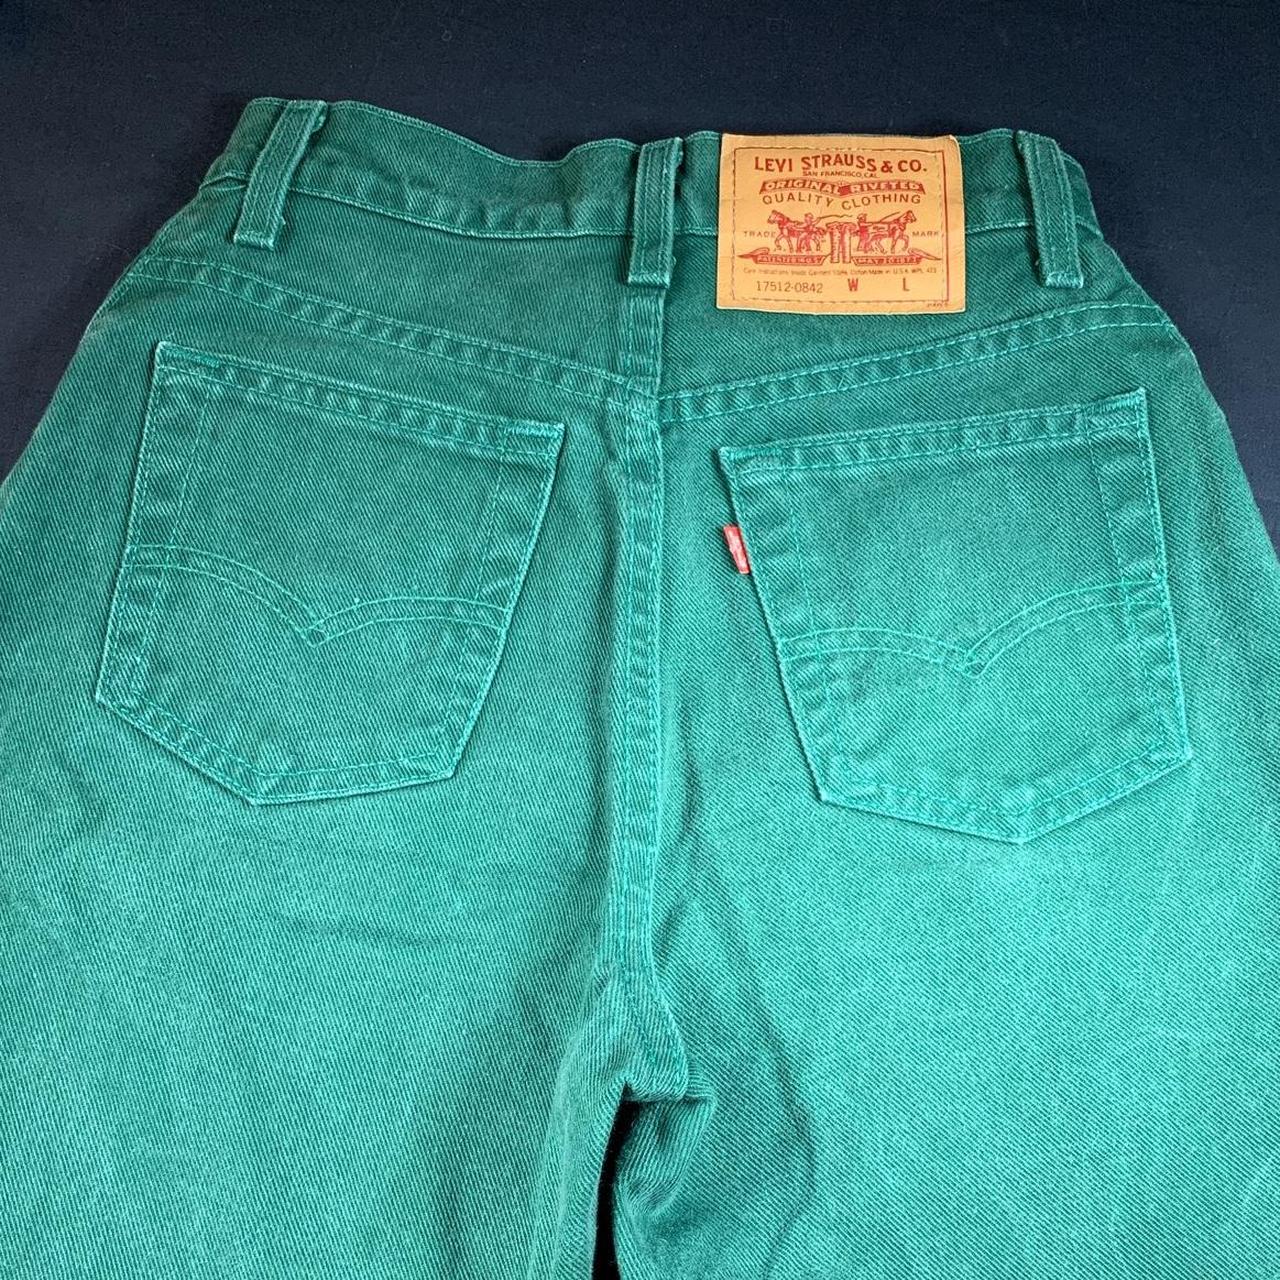 Levis 275 Vintage Jeans Womens Green Pants Made In France Size 29 30 Red  Tab